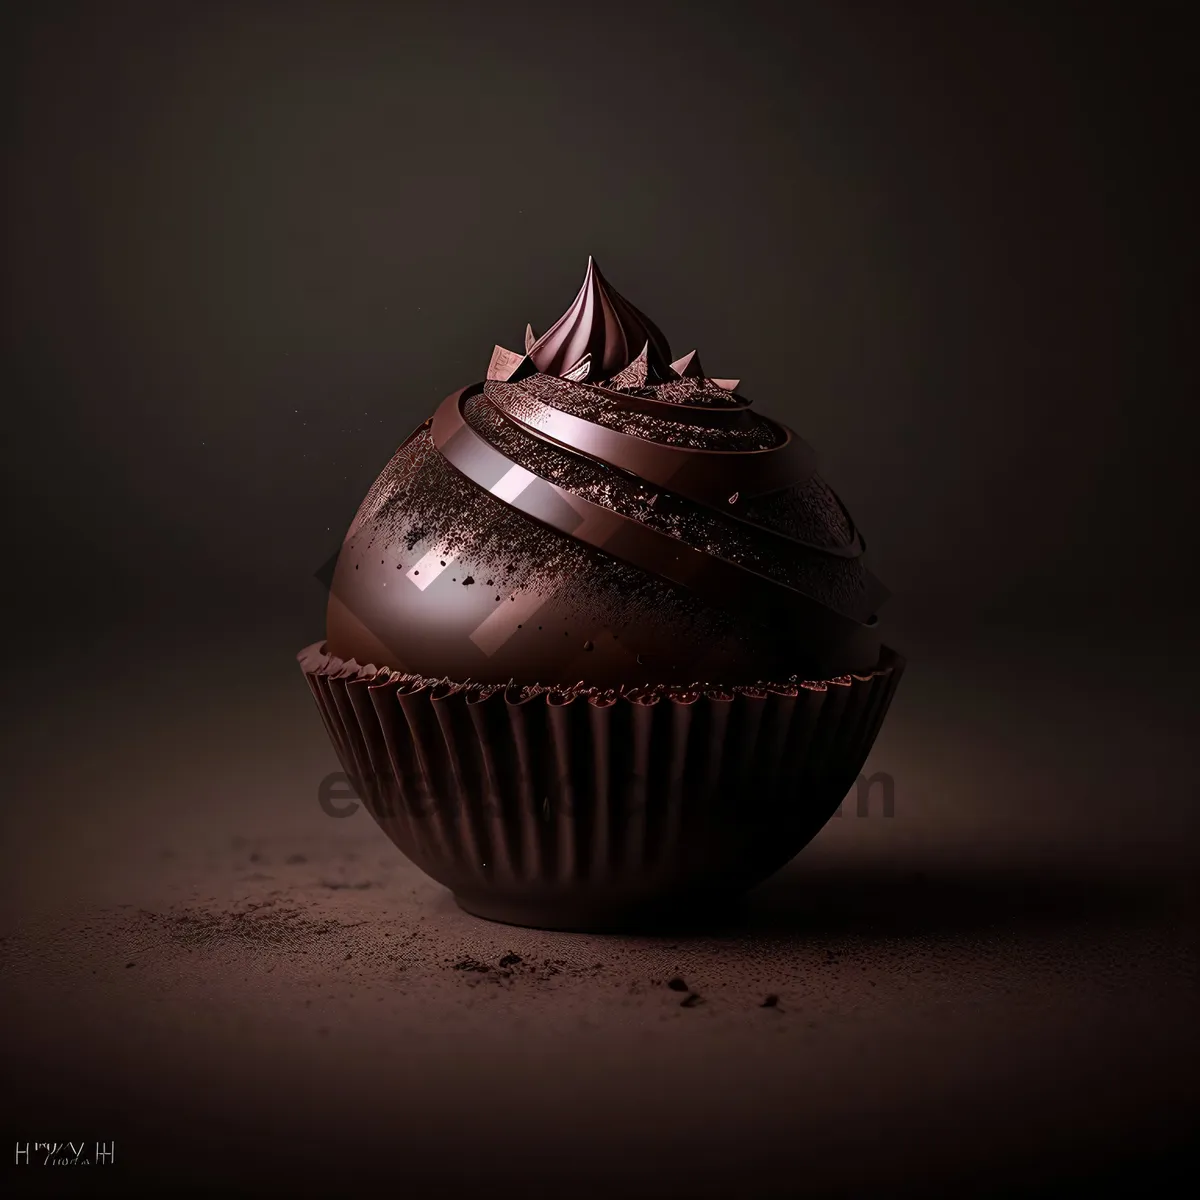 Picture of Baseball equipment & delicious chocolate cupcake combo